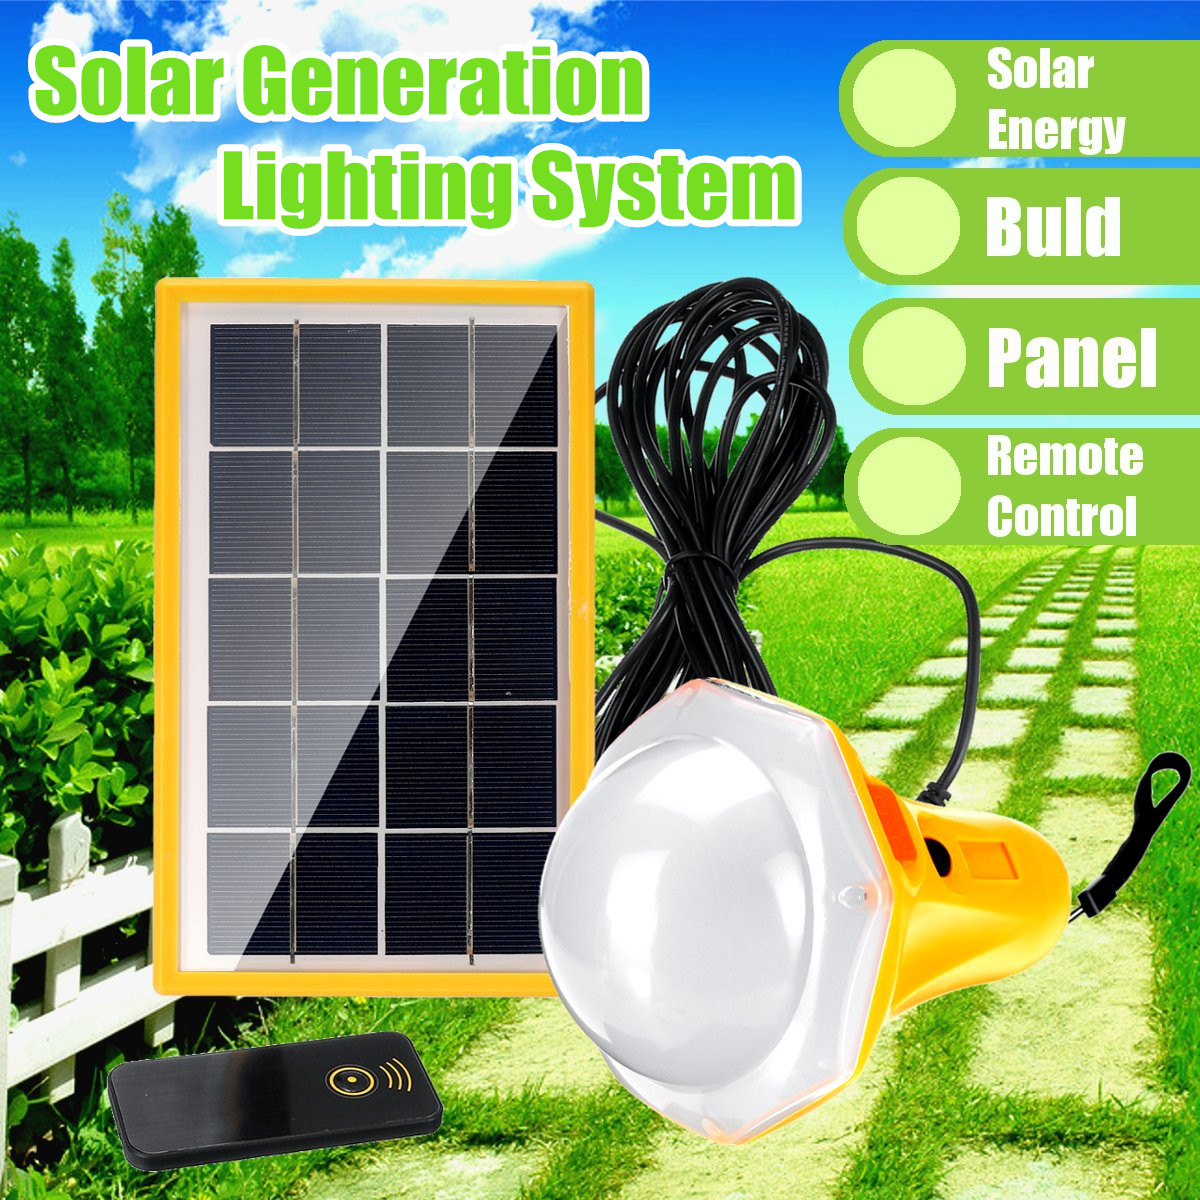 200LM-Solar-Panel-Bulb-Power-5-Modes-DC-Lighting-System-Kits-Emergency-Generator-With-Remote-Control-1460417-2